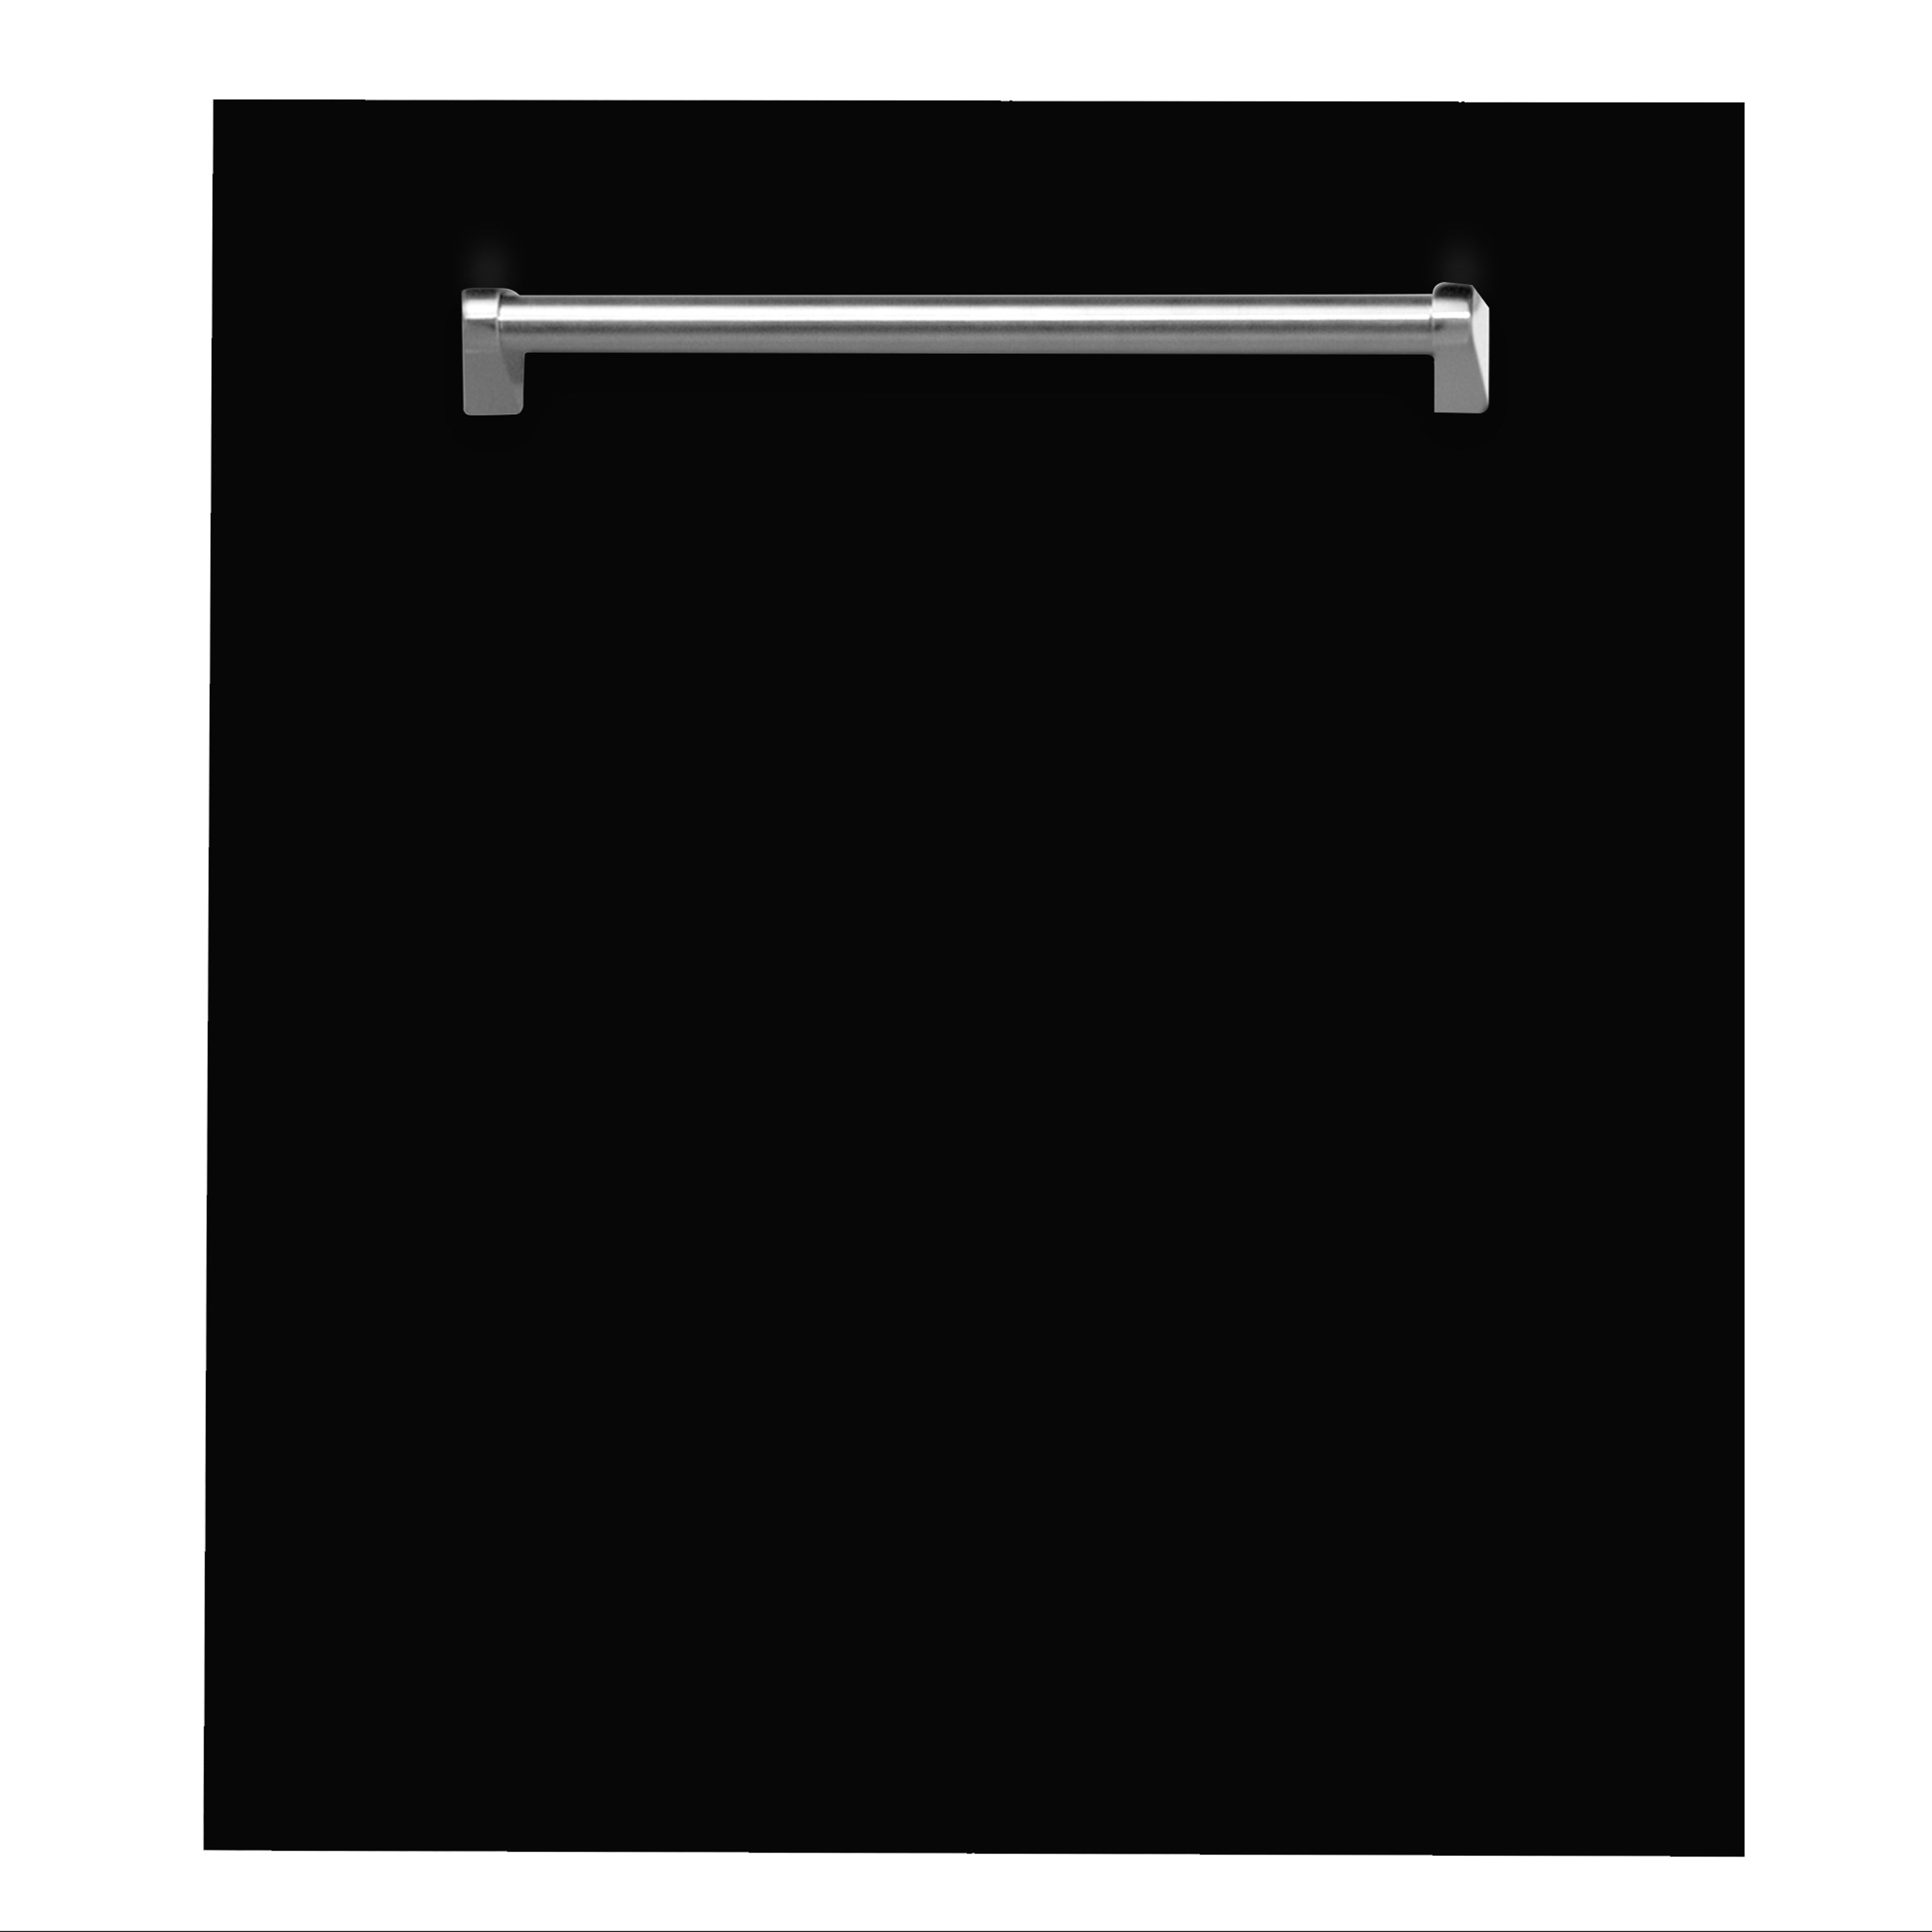 ZLINE 24 in. Black Matte Top Control Built-In Dishwasher with Stainless Steel Tub and Traditional Style Handle, 52dBa